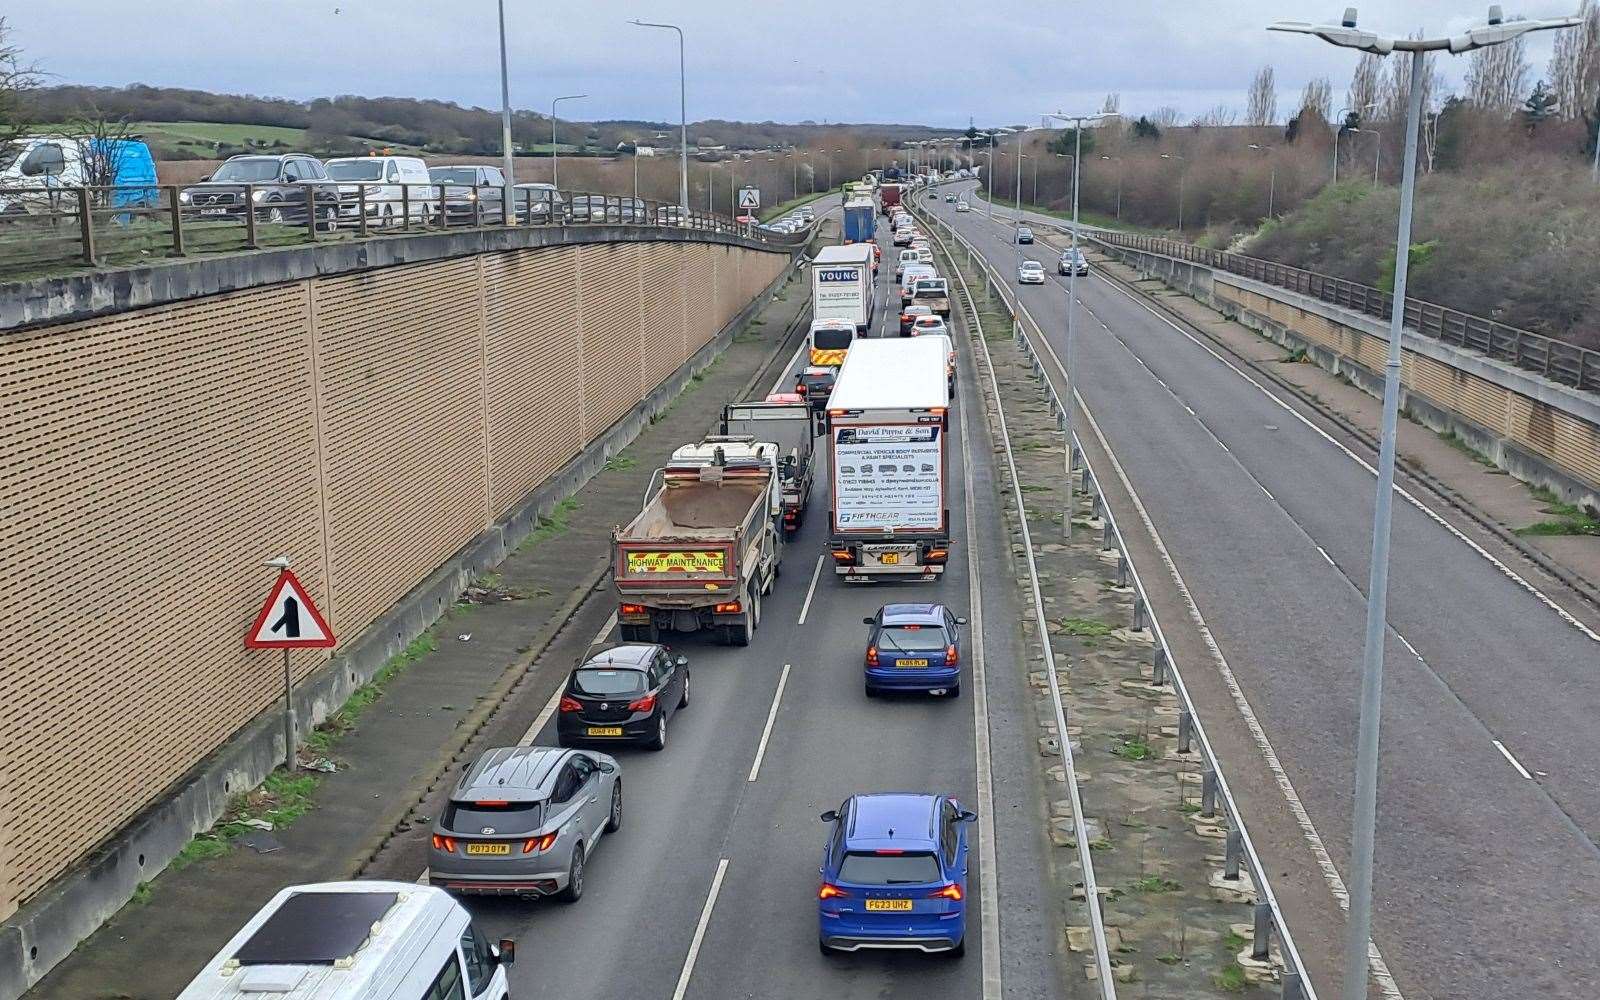 There are long lines of traffic on the A299 Thanet Way